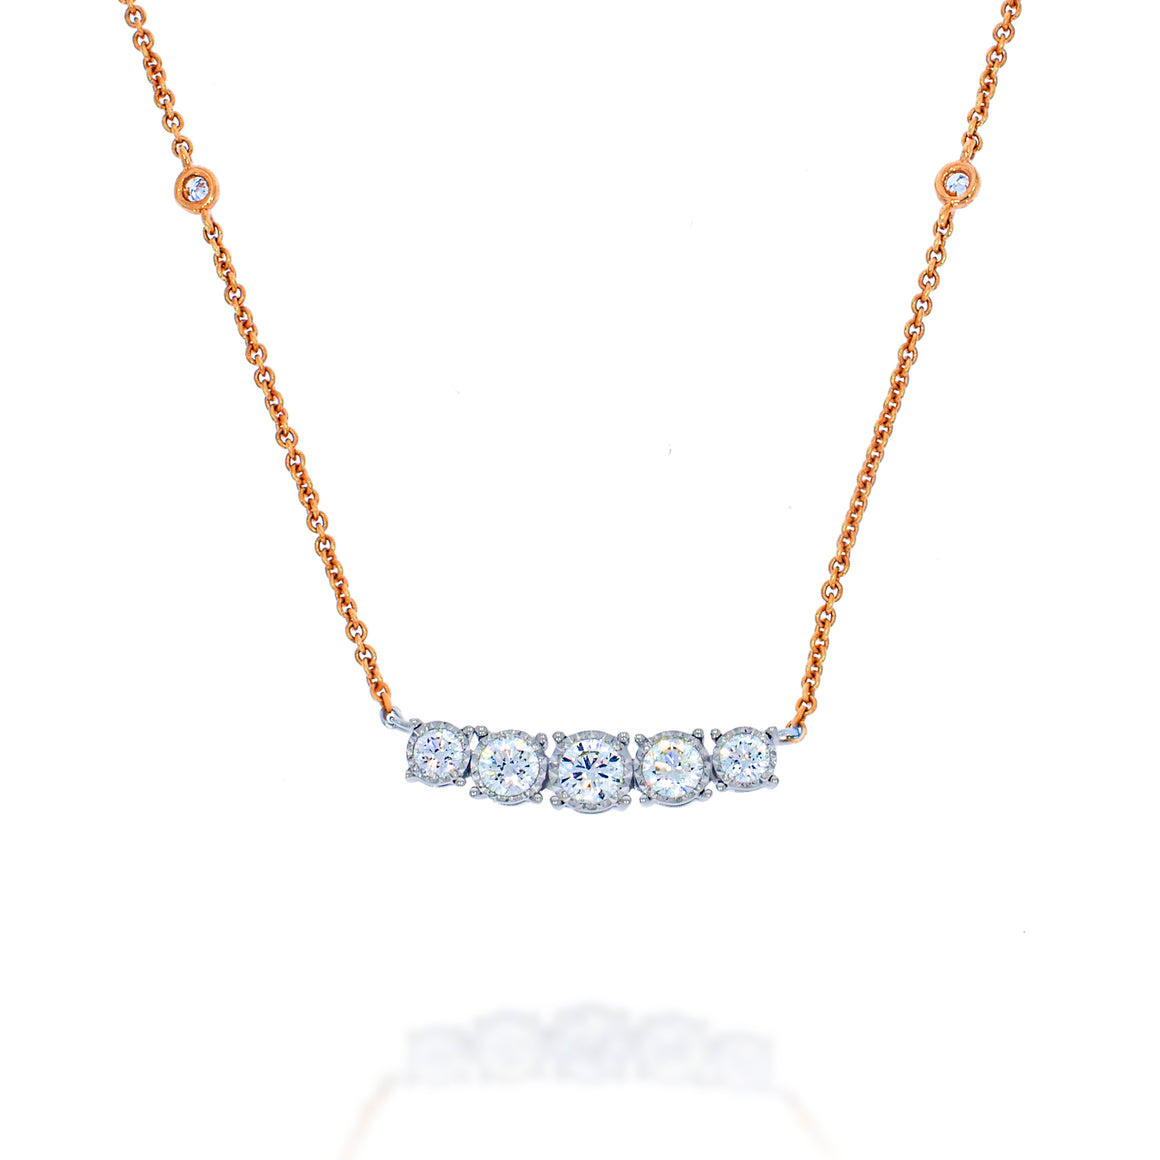 A Gentle and classic necklace! 5 diamonds cups on the stunning pendant, and 4 more on chain.